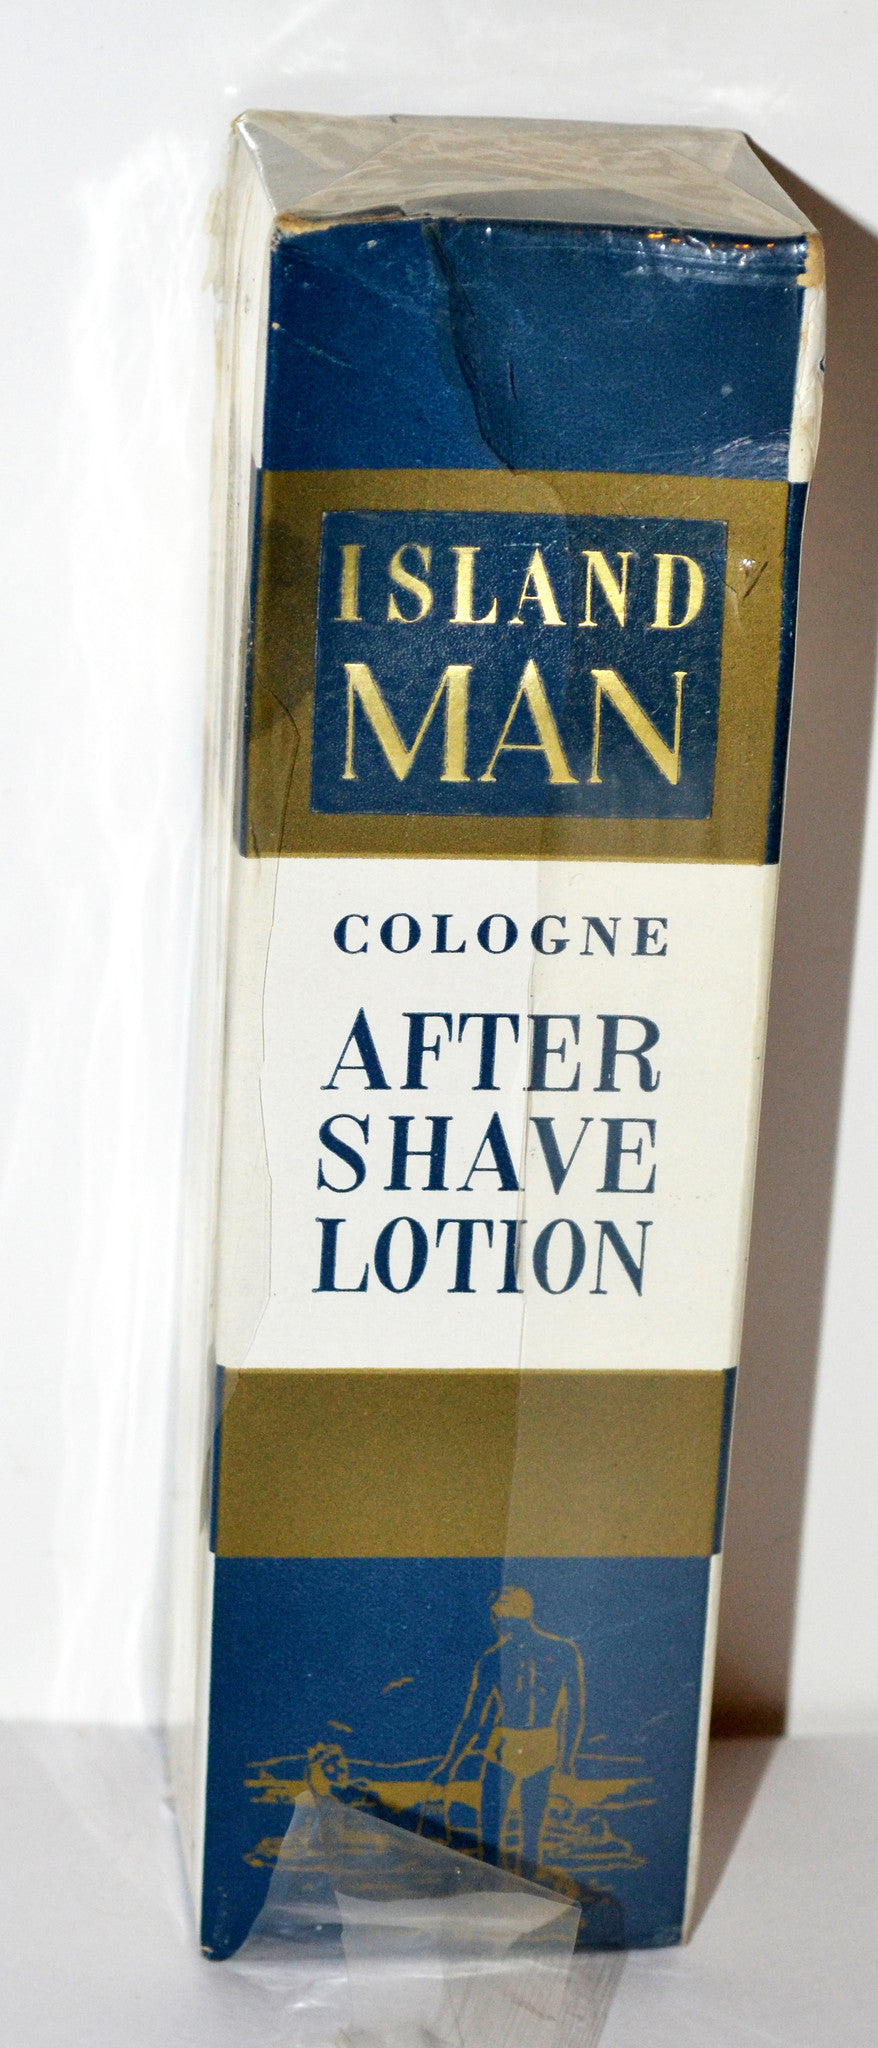 Island Man Cologne After Shave Lotion